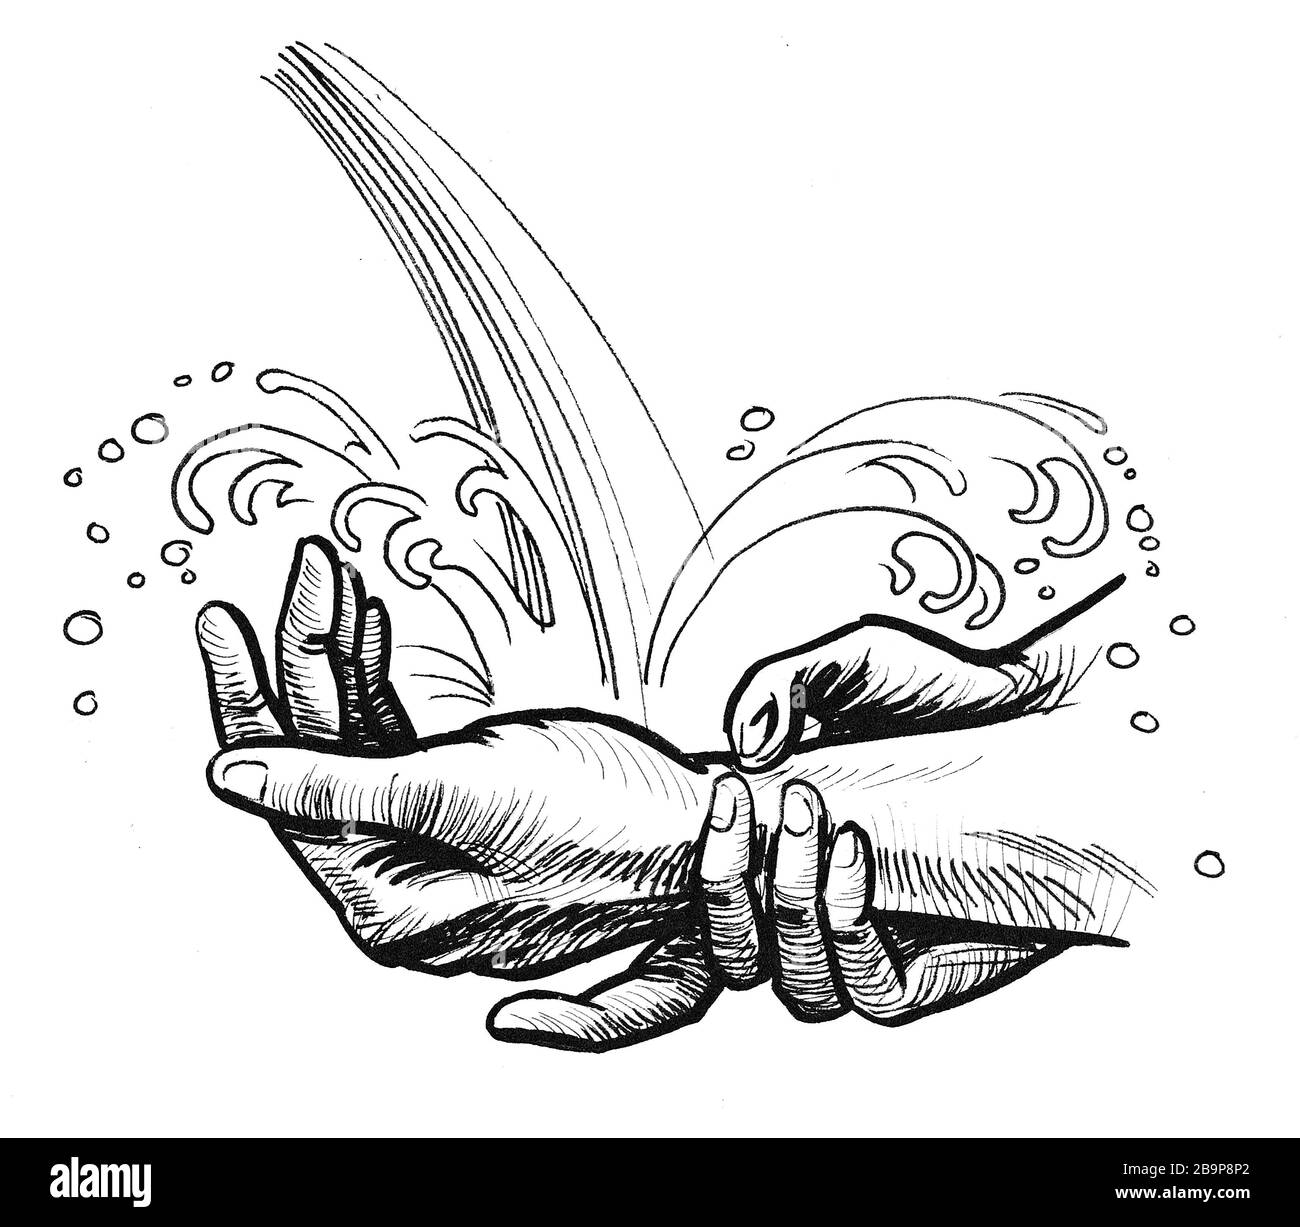 Hands washing. Ink black and white drawing Stock Photo - Alamy